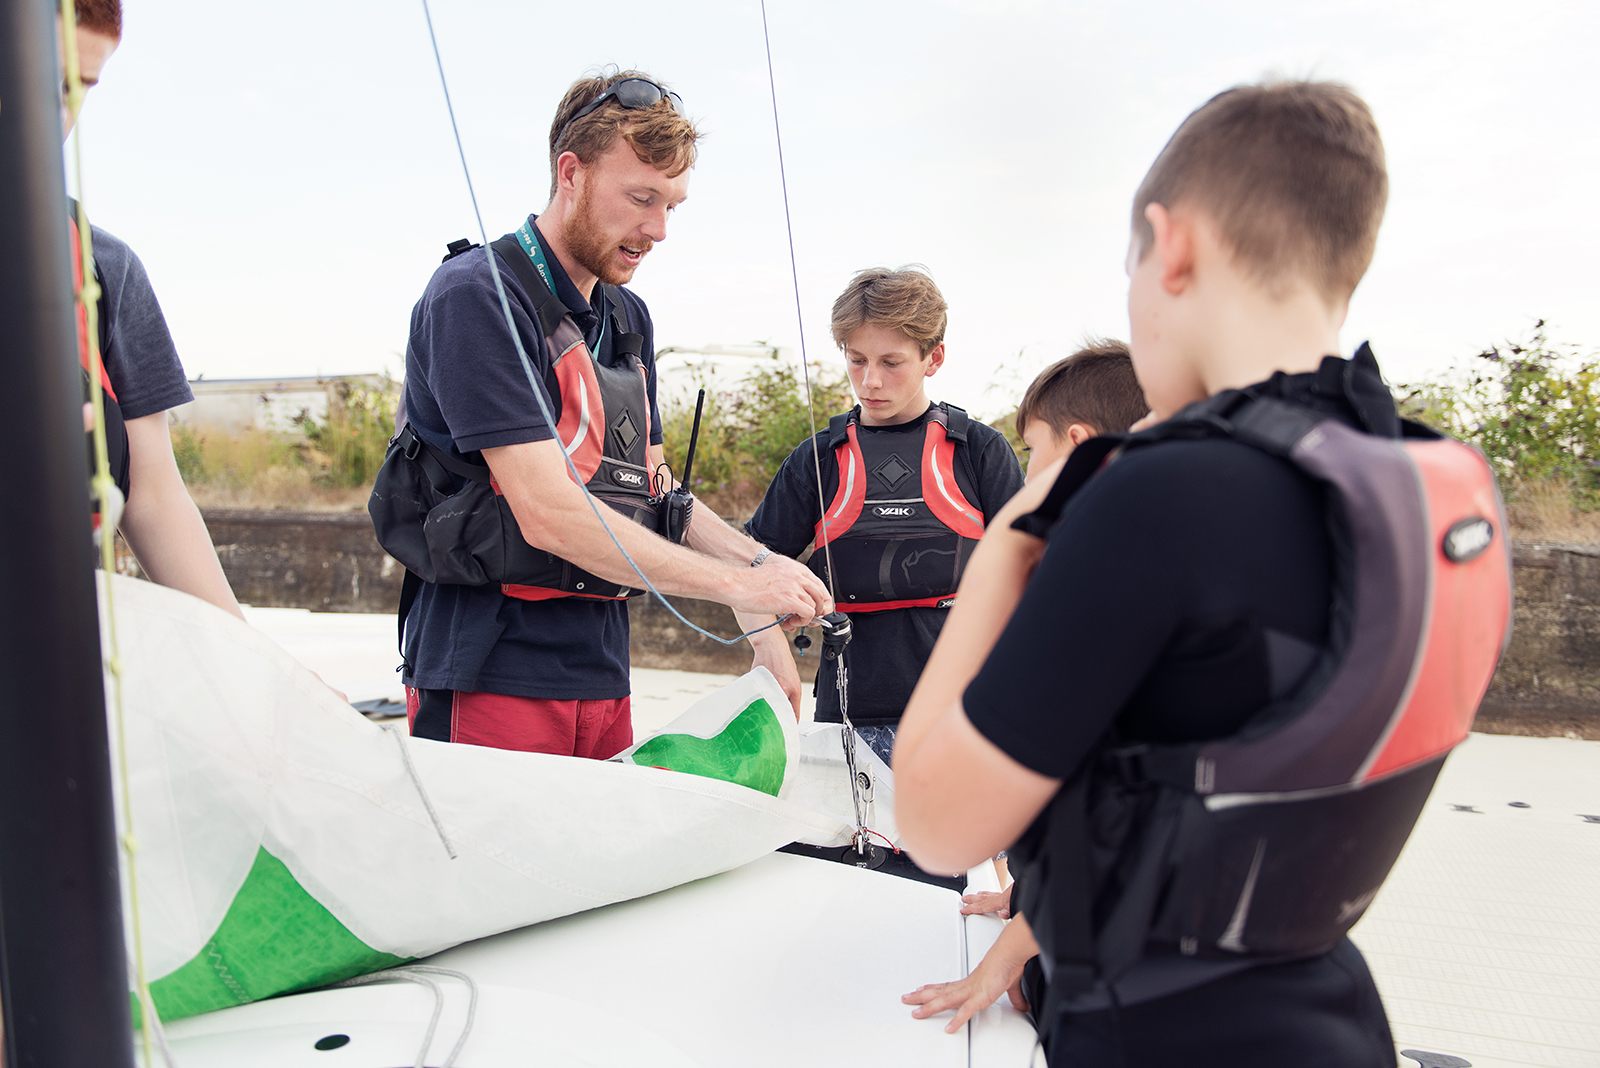 Instructor showing cadets how to attach a sail to a boat